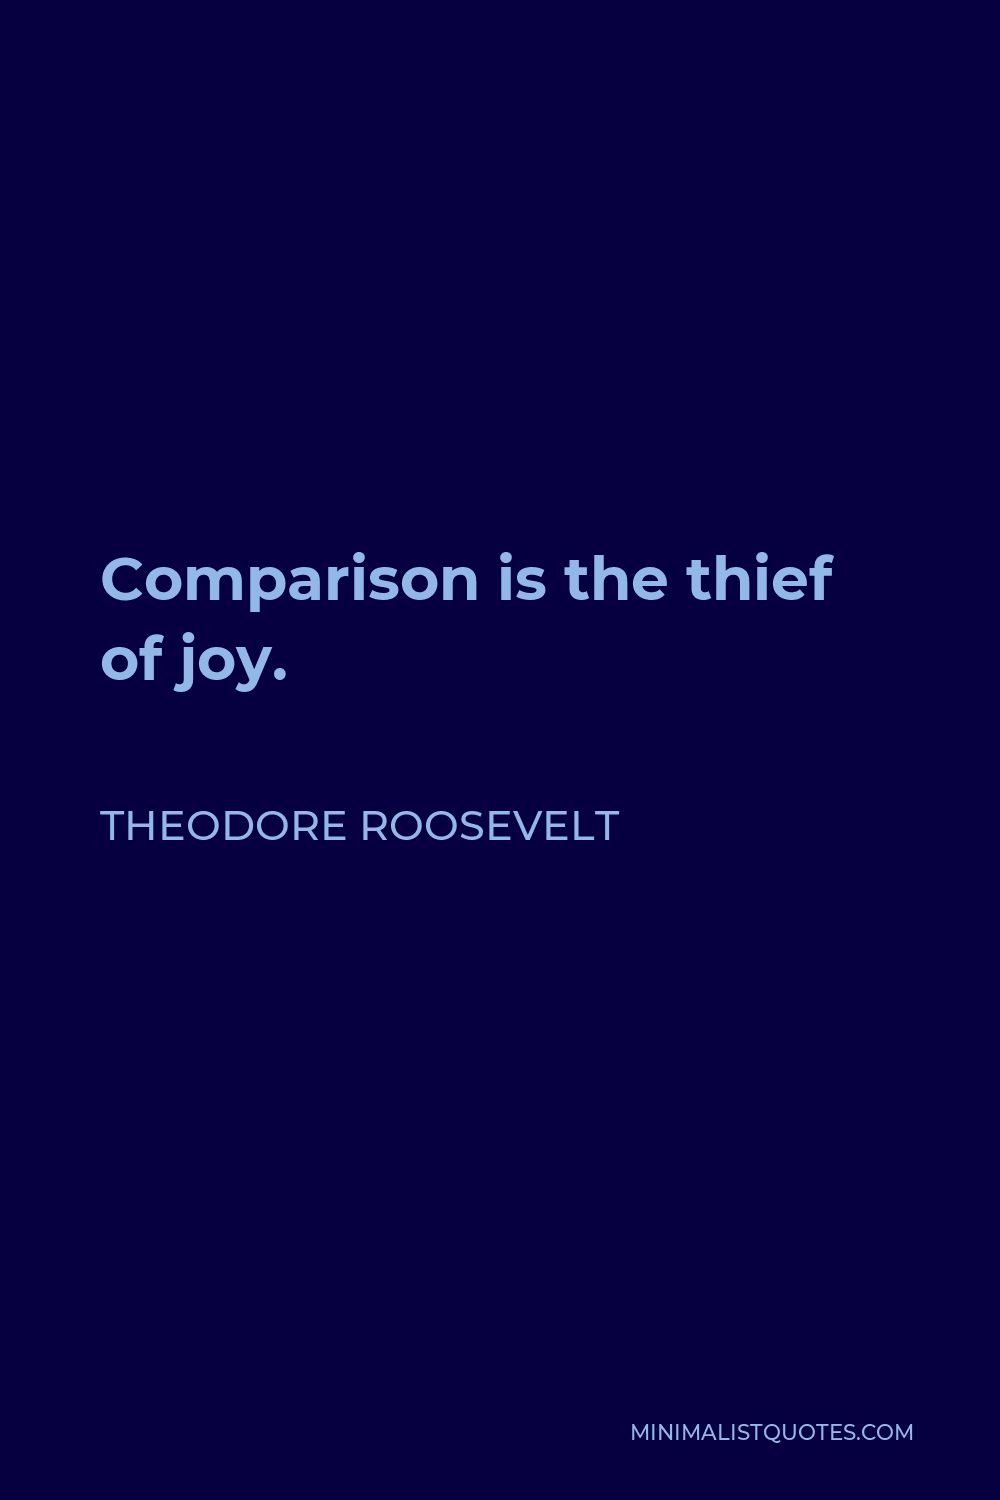 Theodore Roosevelt Quote - Comparison is the thief of joy.